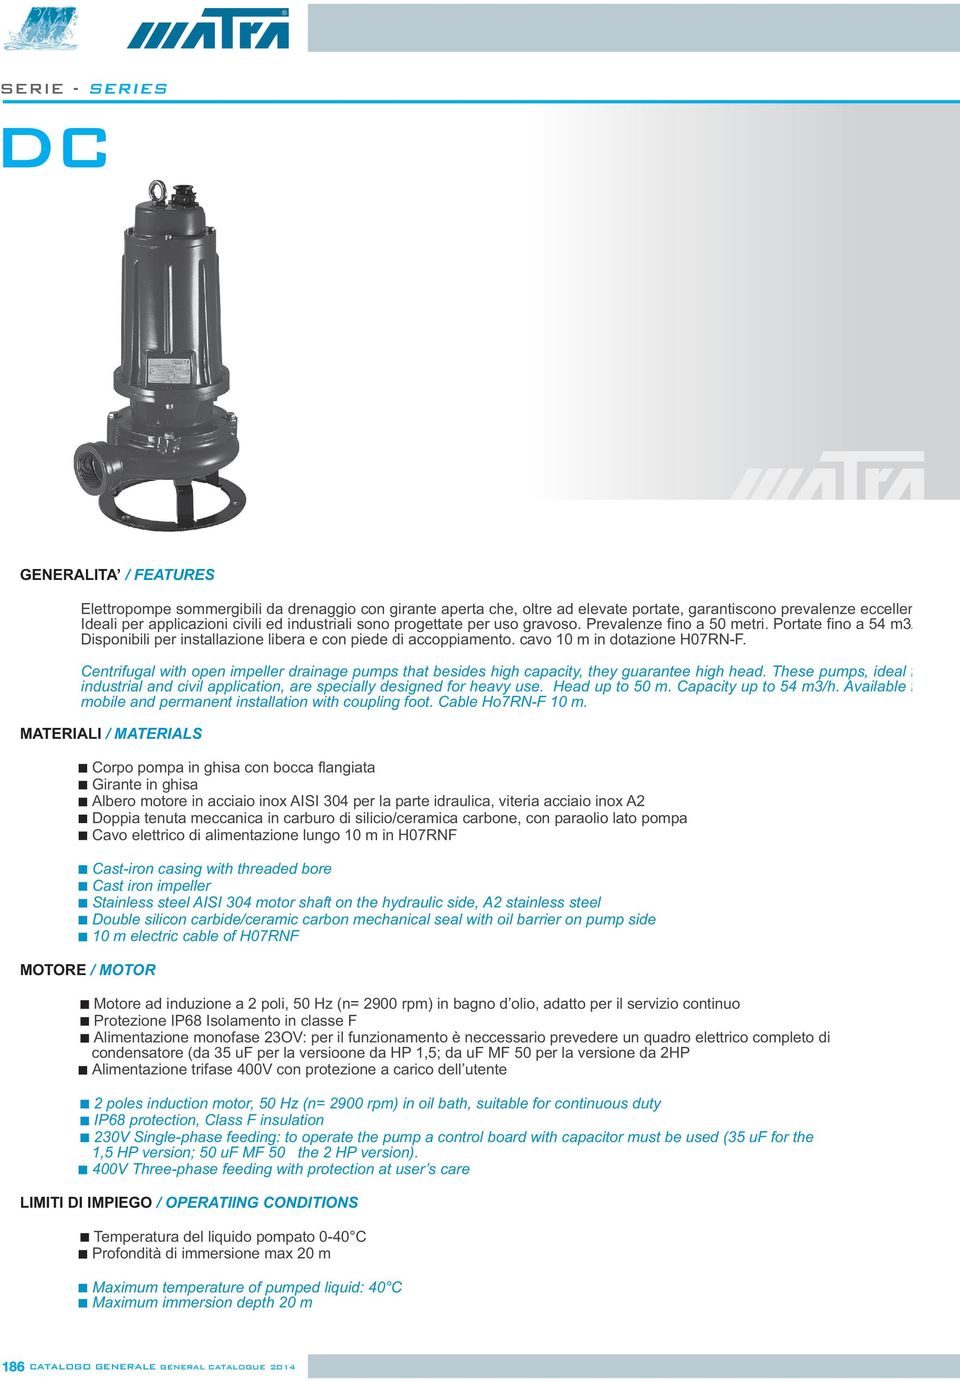 Centrifugal with open impeller drainage pumps that besides high capacity, they guarantee high head. These pumps, ideal f industrial and civil application, are specially designed for heavy use.